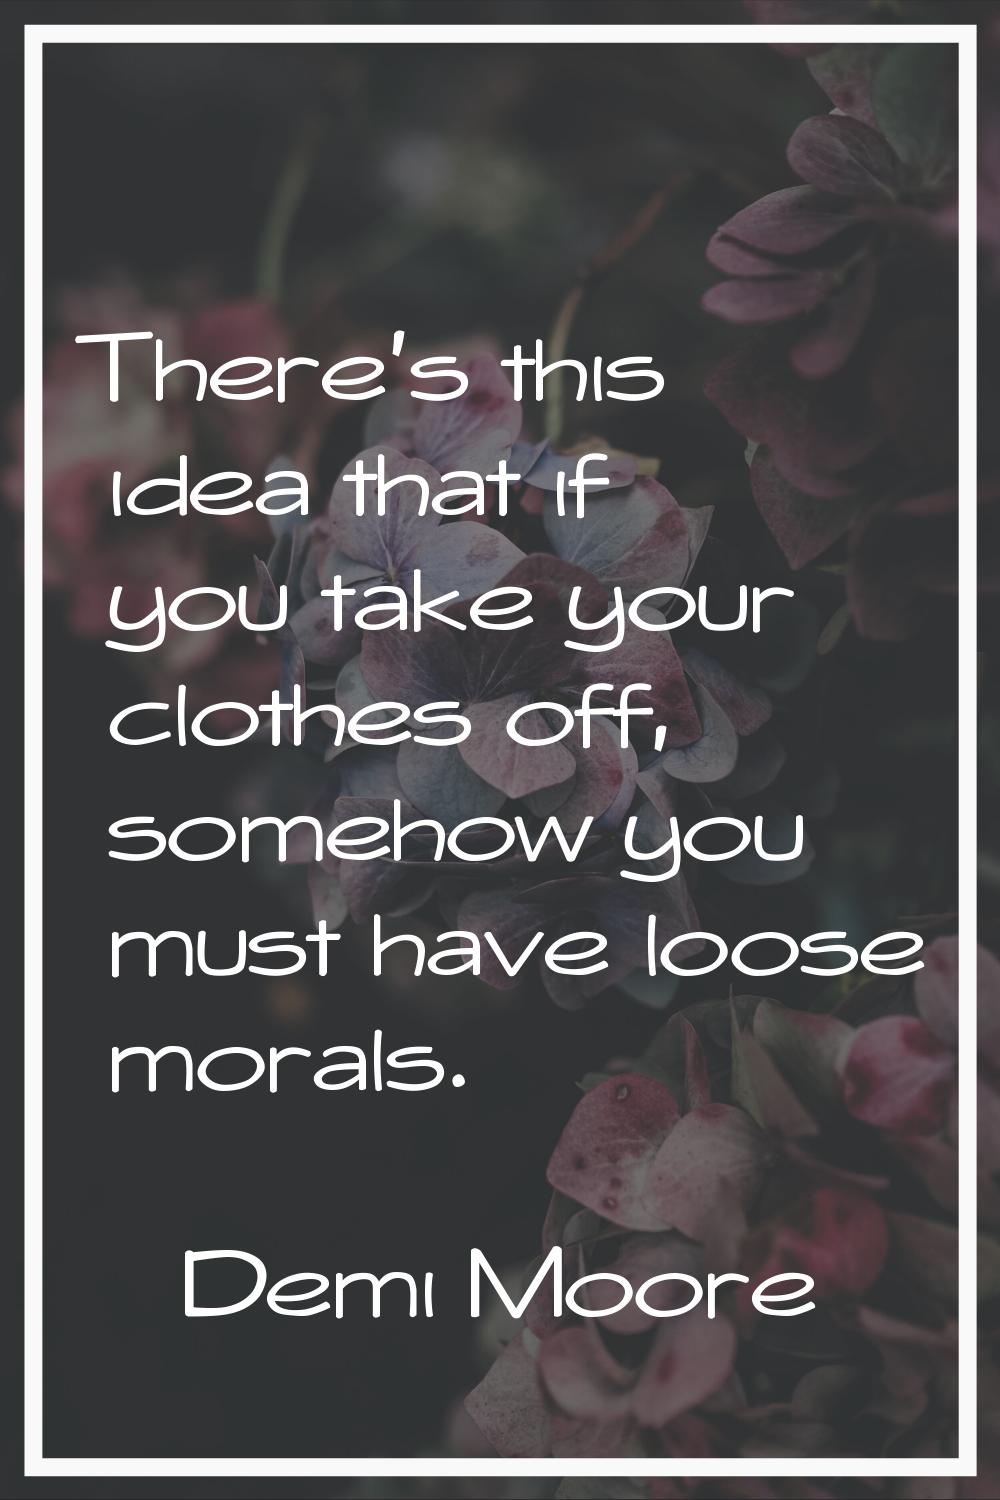 There's this idea that if you take your clothes off, somehow you must have loose morals.